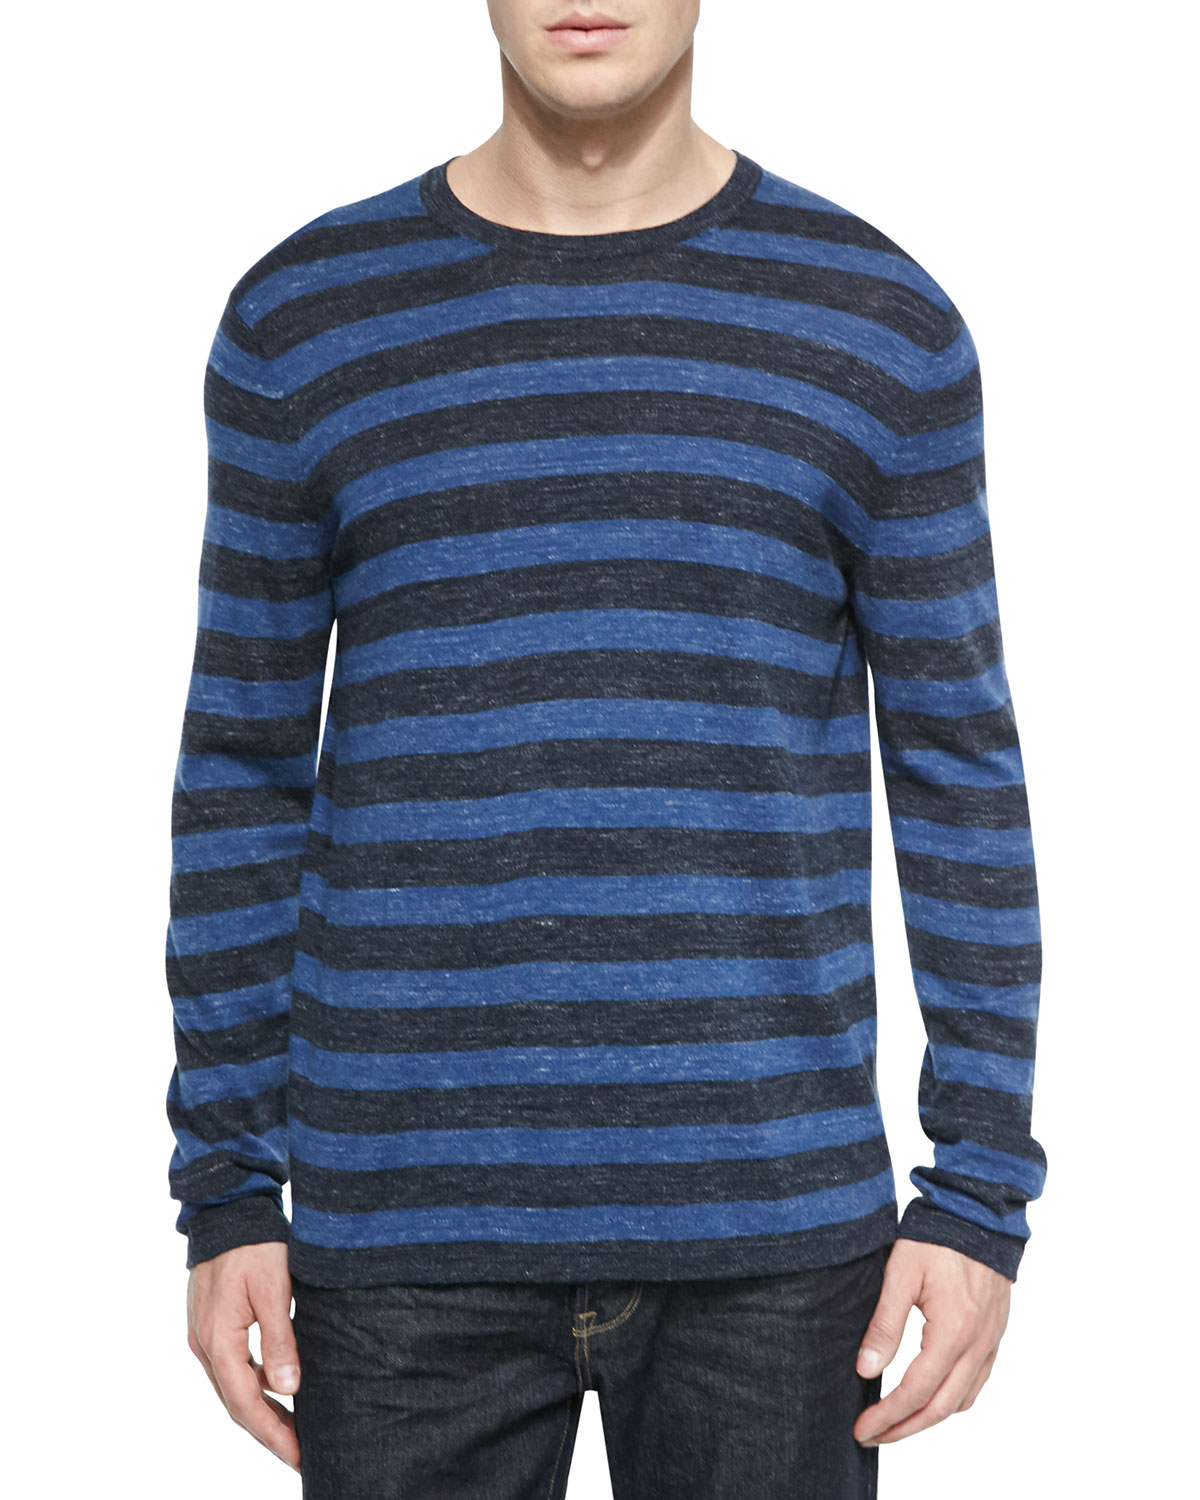 Lyst - Vince Long-sleeve Striped Crewneck Sweater in Blue for Men